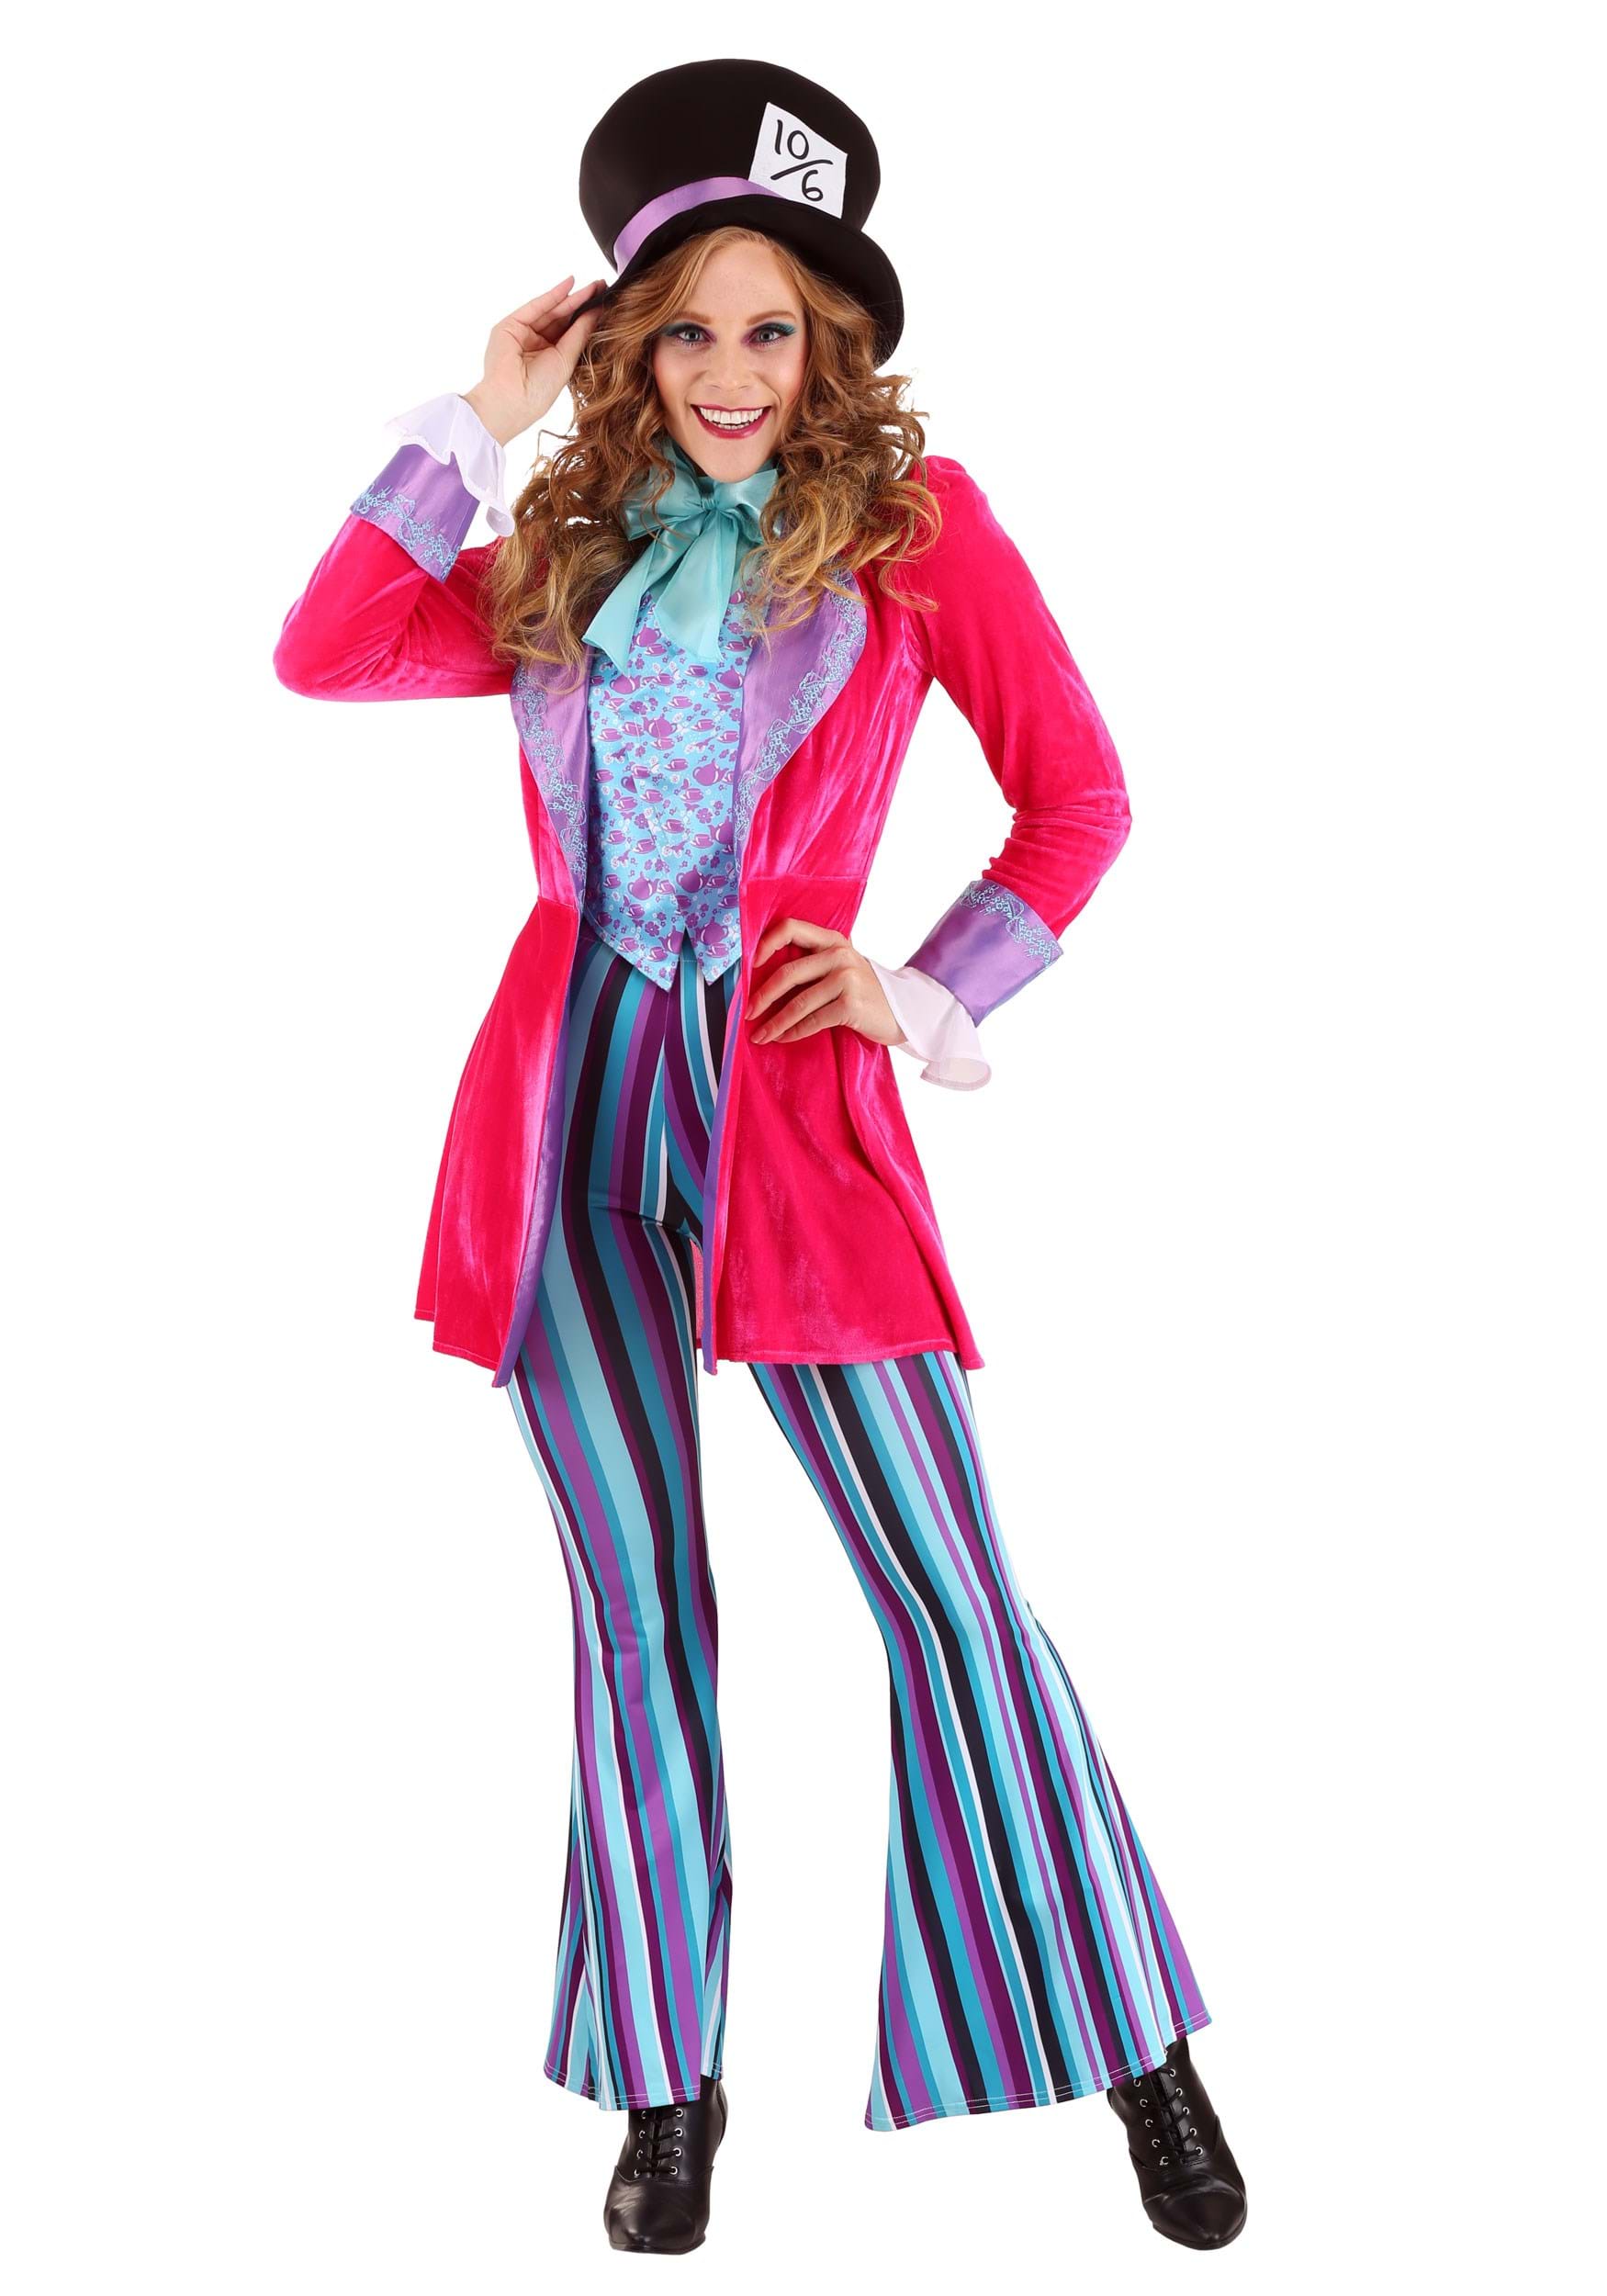 Photos - Fancy Dress Mad Hatter FUN Costumes Women's Whimsical  Costume | Adult  Costu 